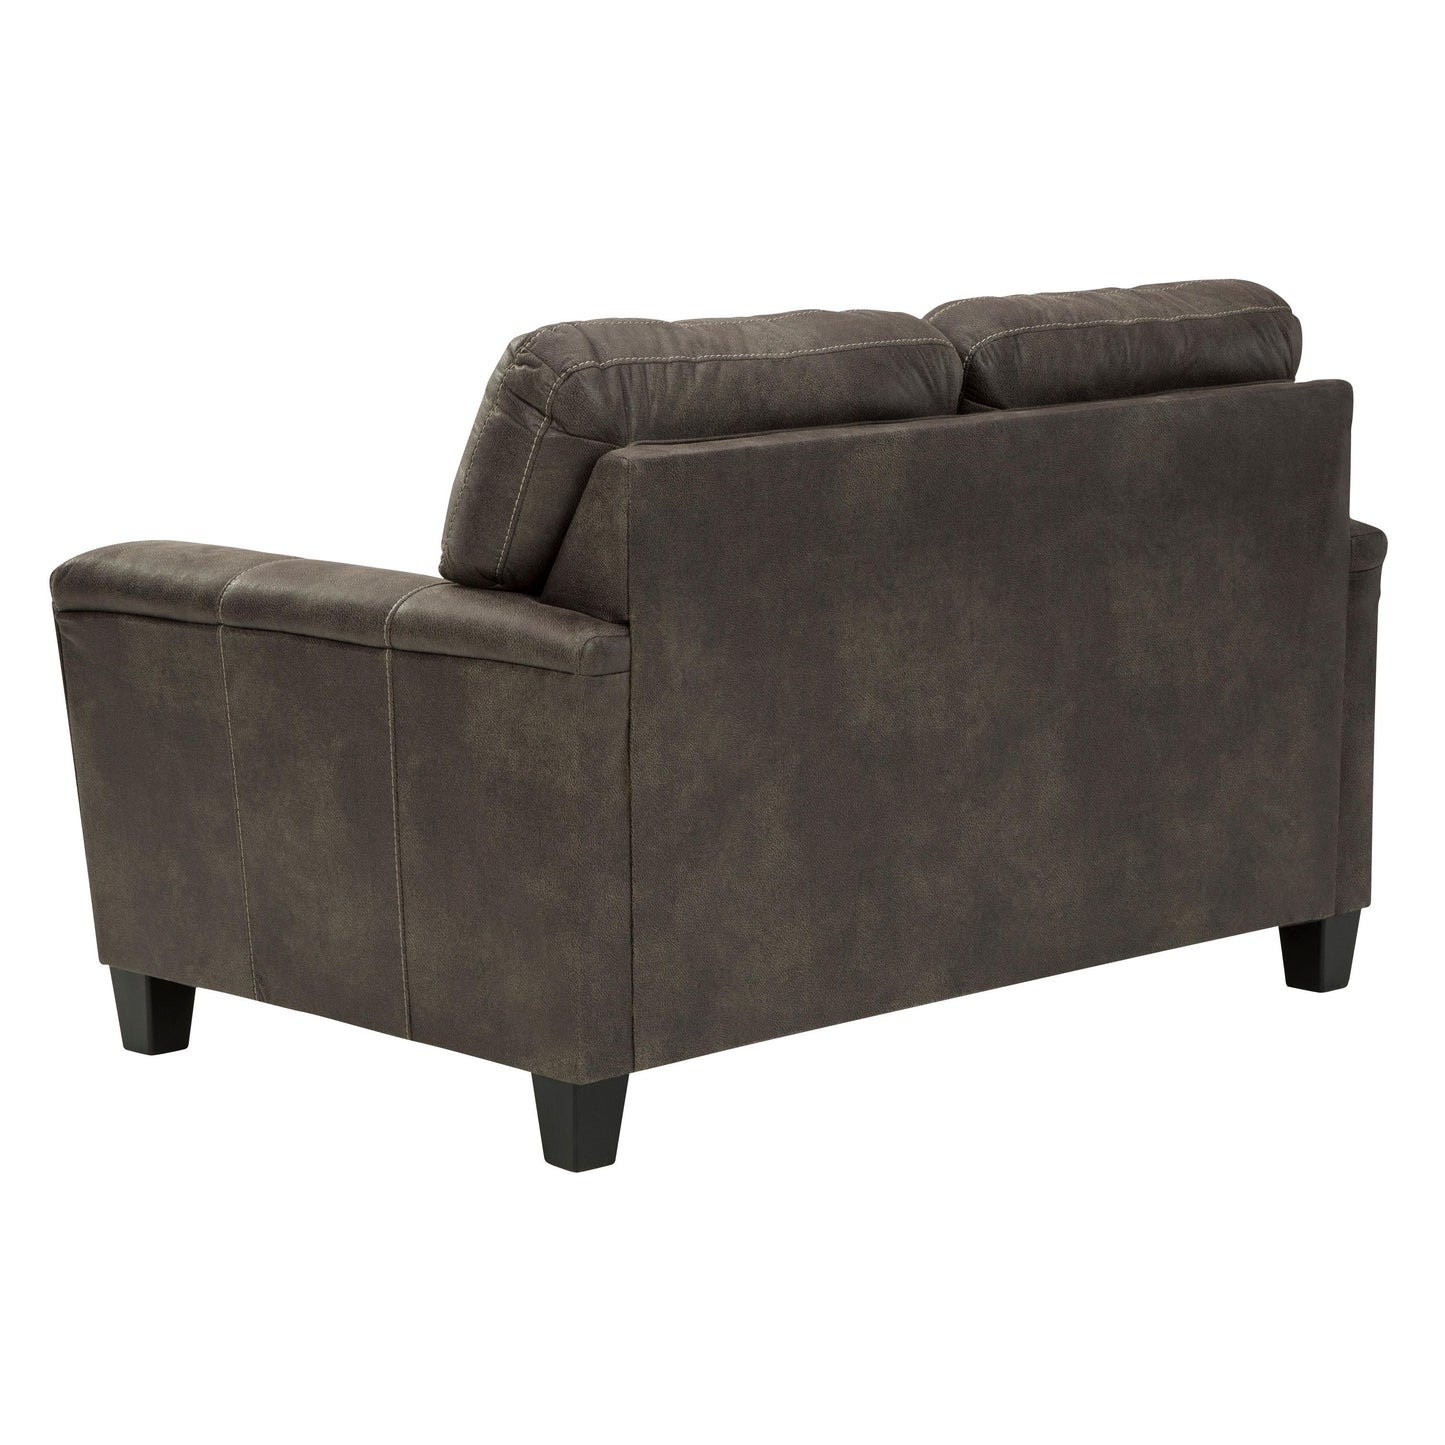 Signature Design by Ashley Navi Stationary Leather Look Loveseat 9400235